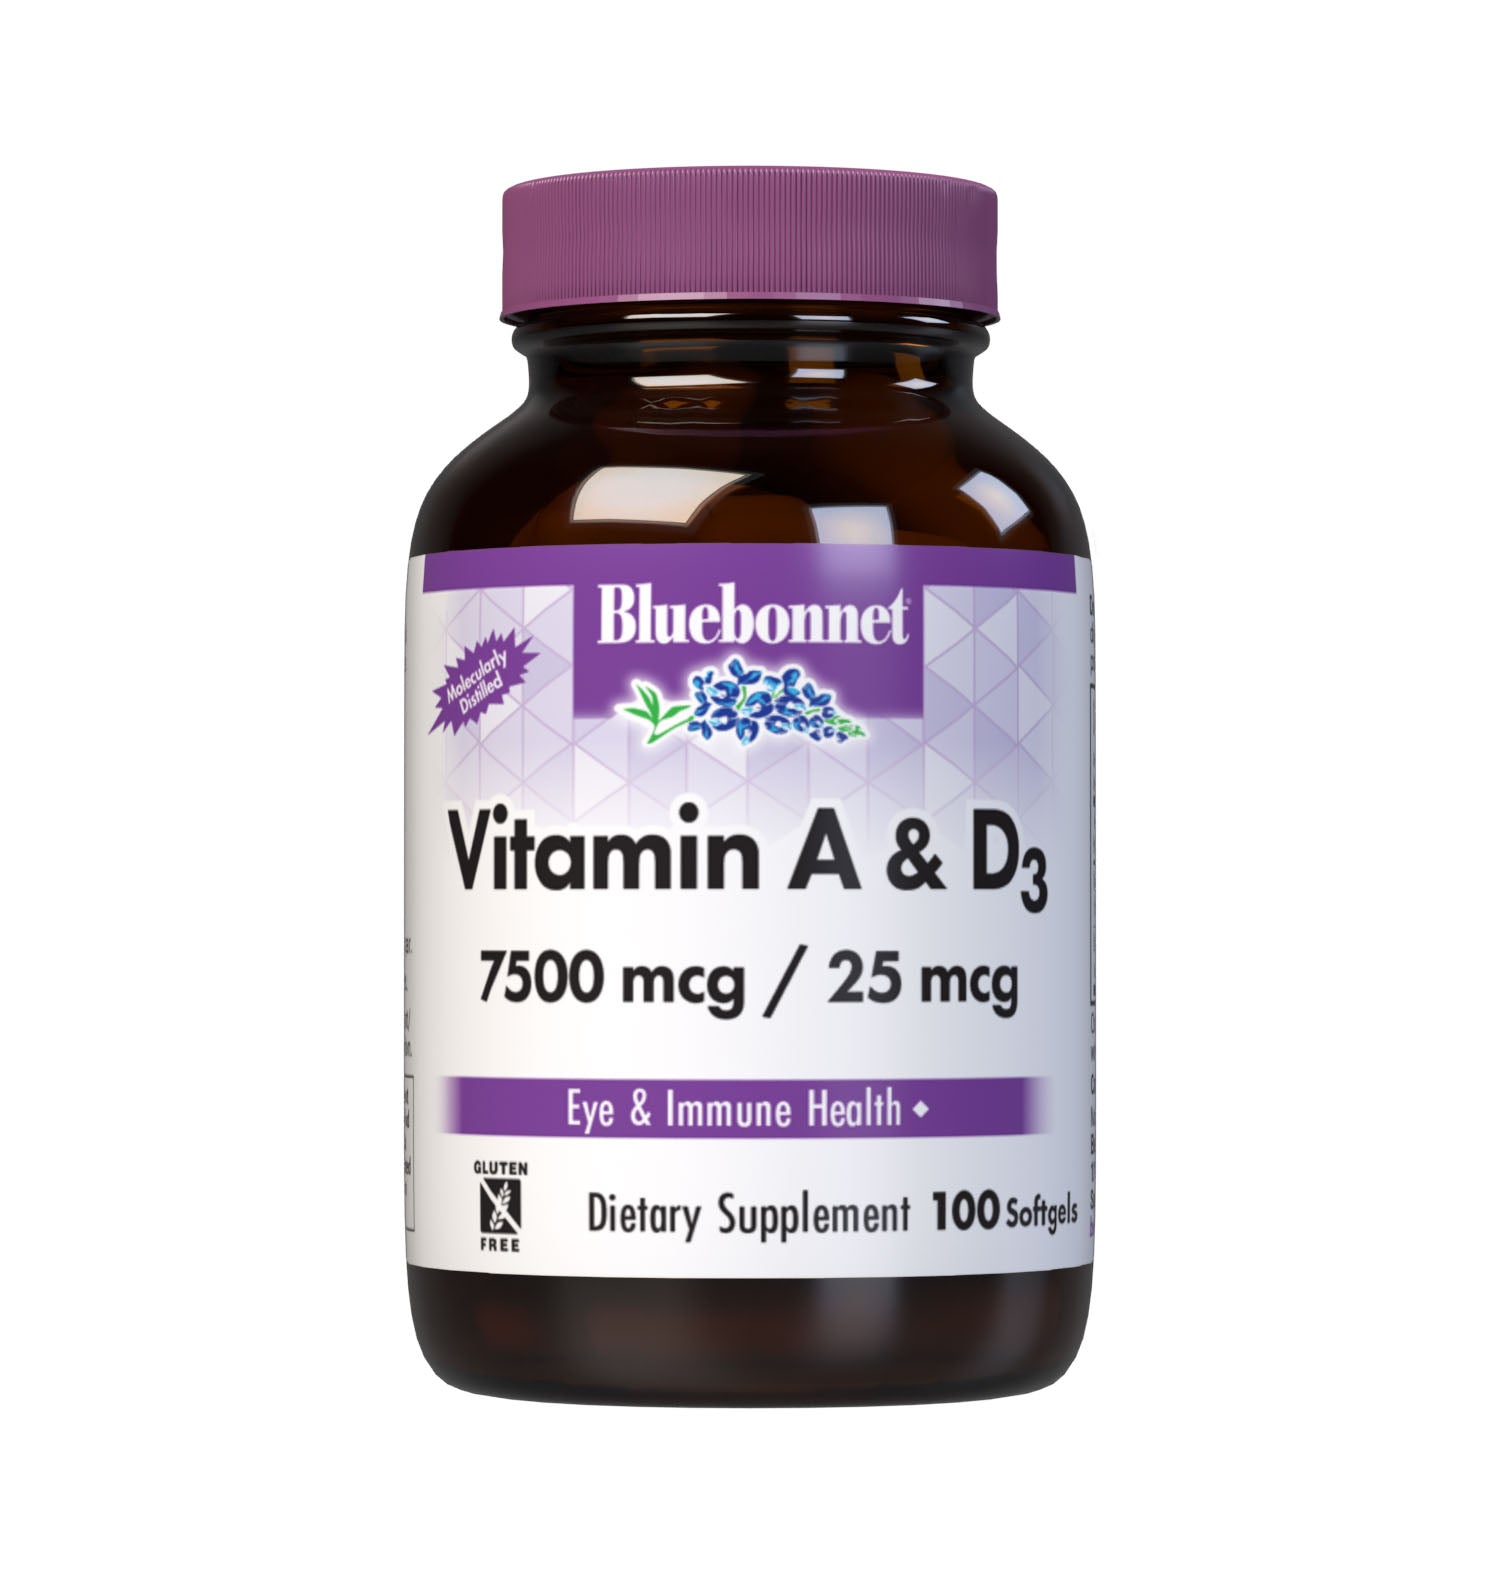 Bluebonnet’s Vitamin A & D3 100 Softgels are formulated with vitamin A and vitamin D3 (cholecalciferol) that supports eye health and immune function from deep sea, cold water, fish liver oil and are molecularly distilled. #size_100 count